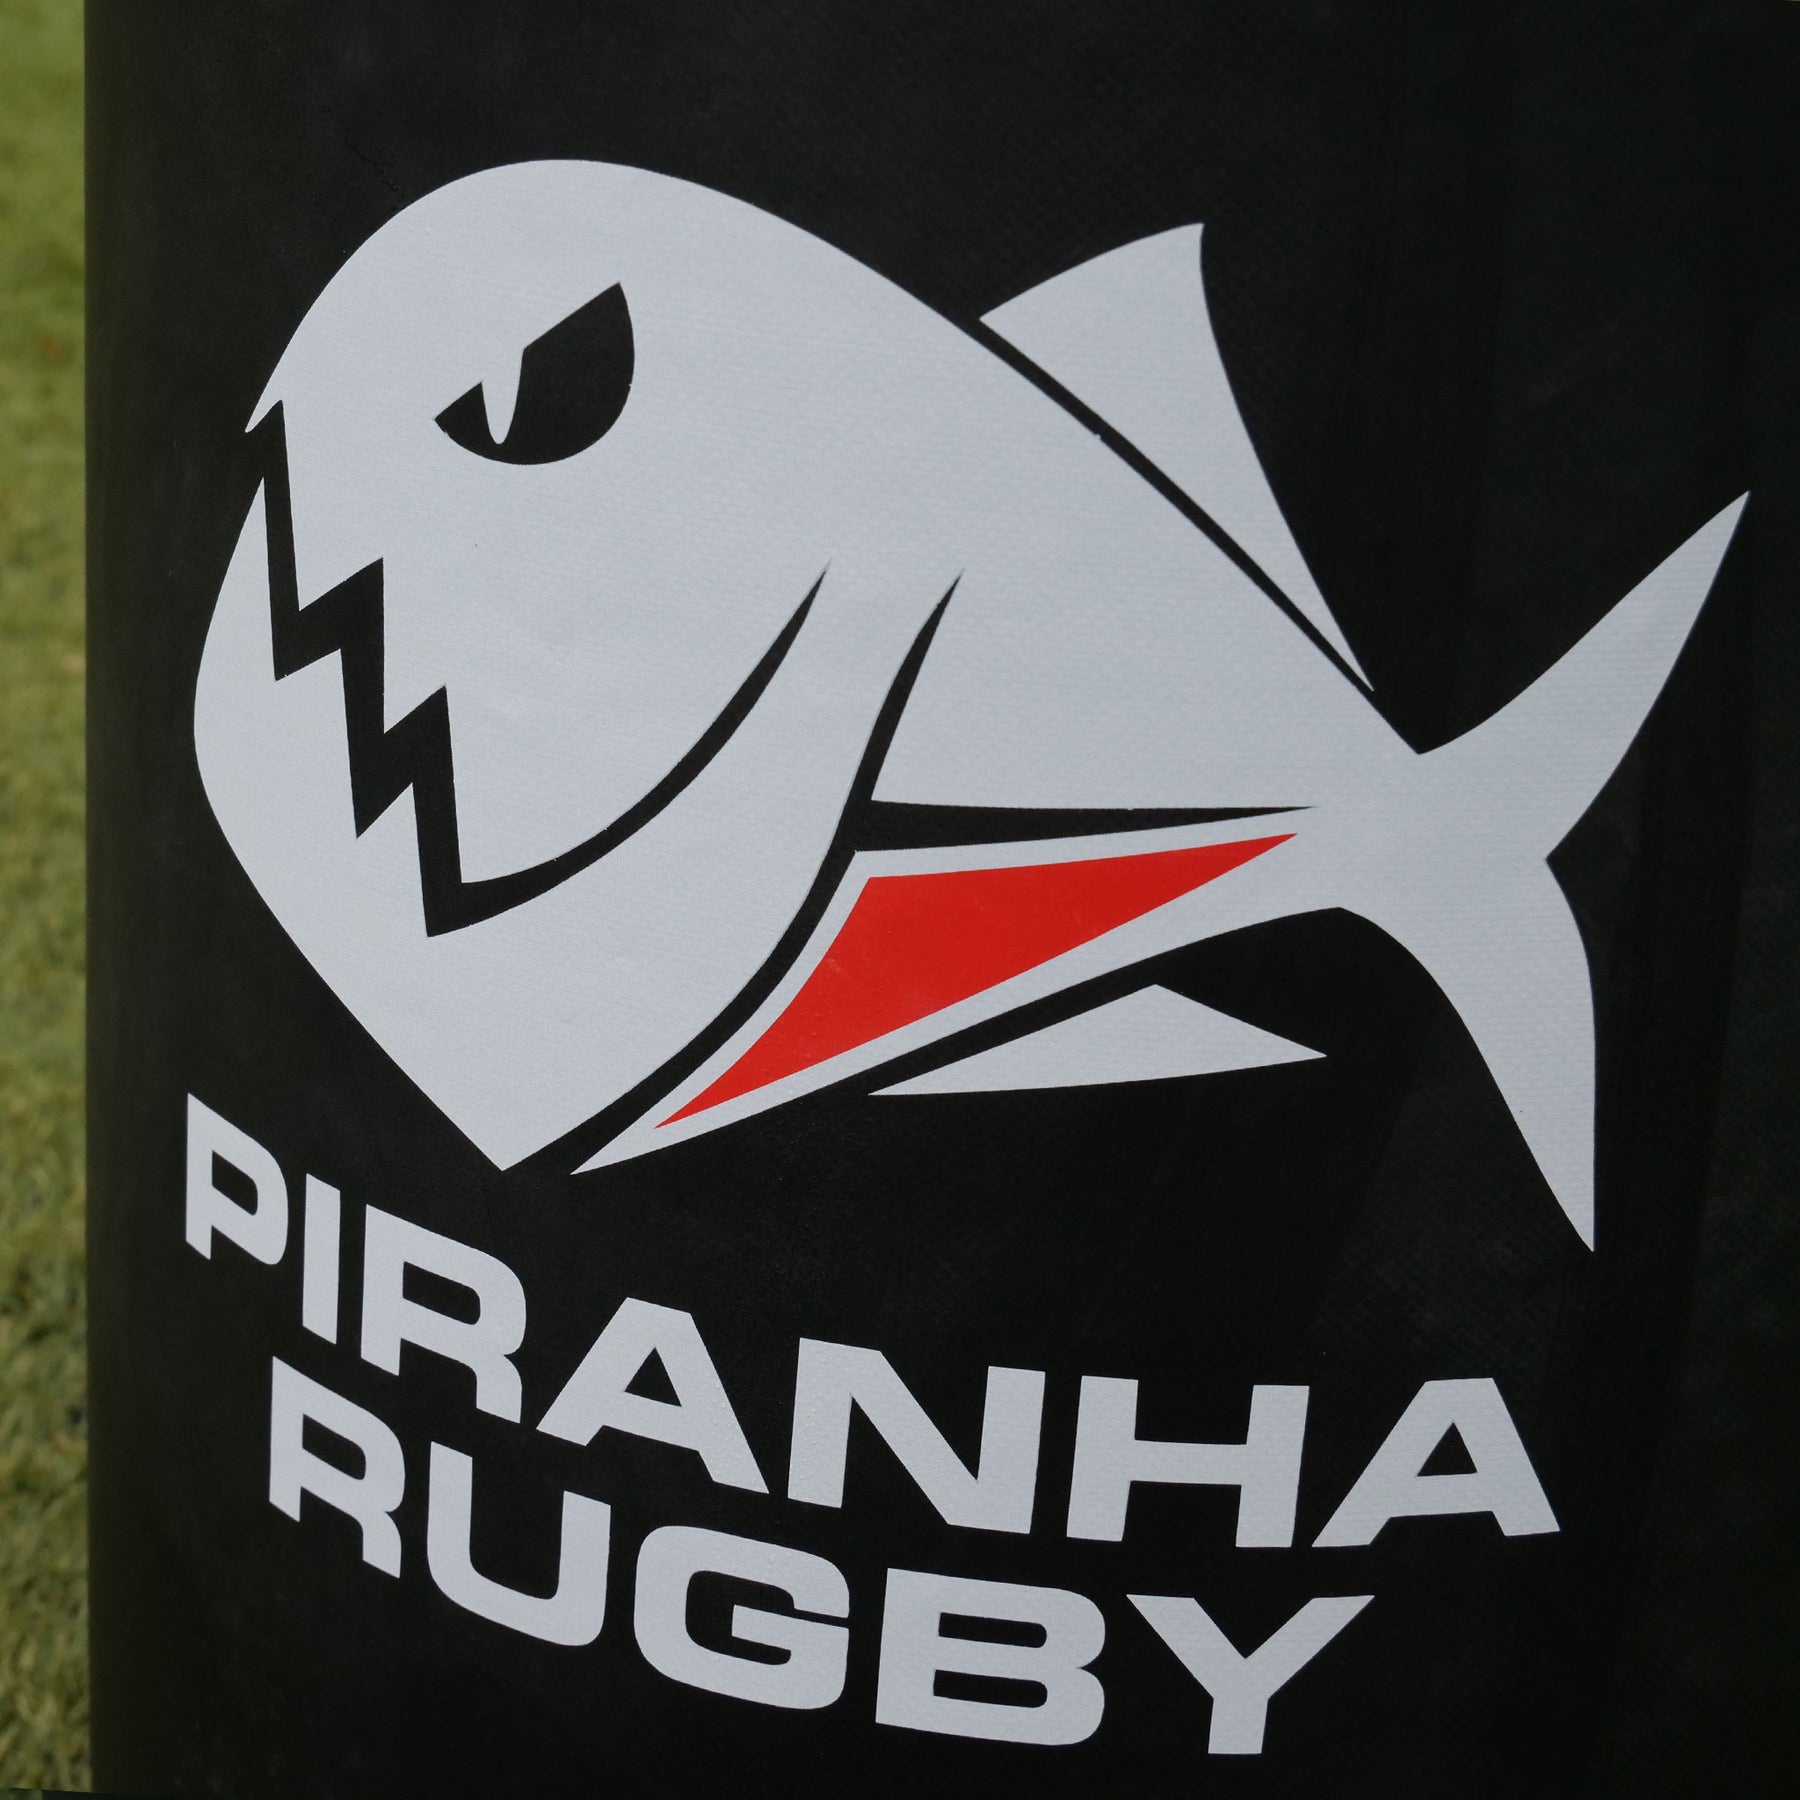 Piranha Weighted Half Rugby Tackle Bag